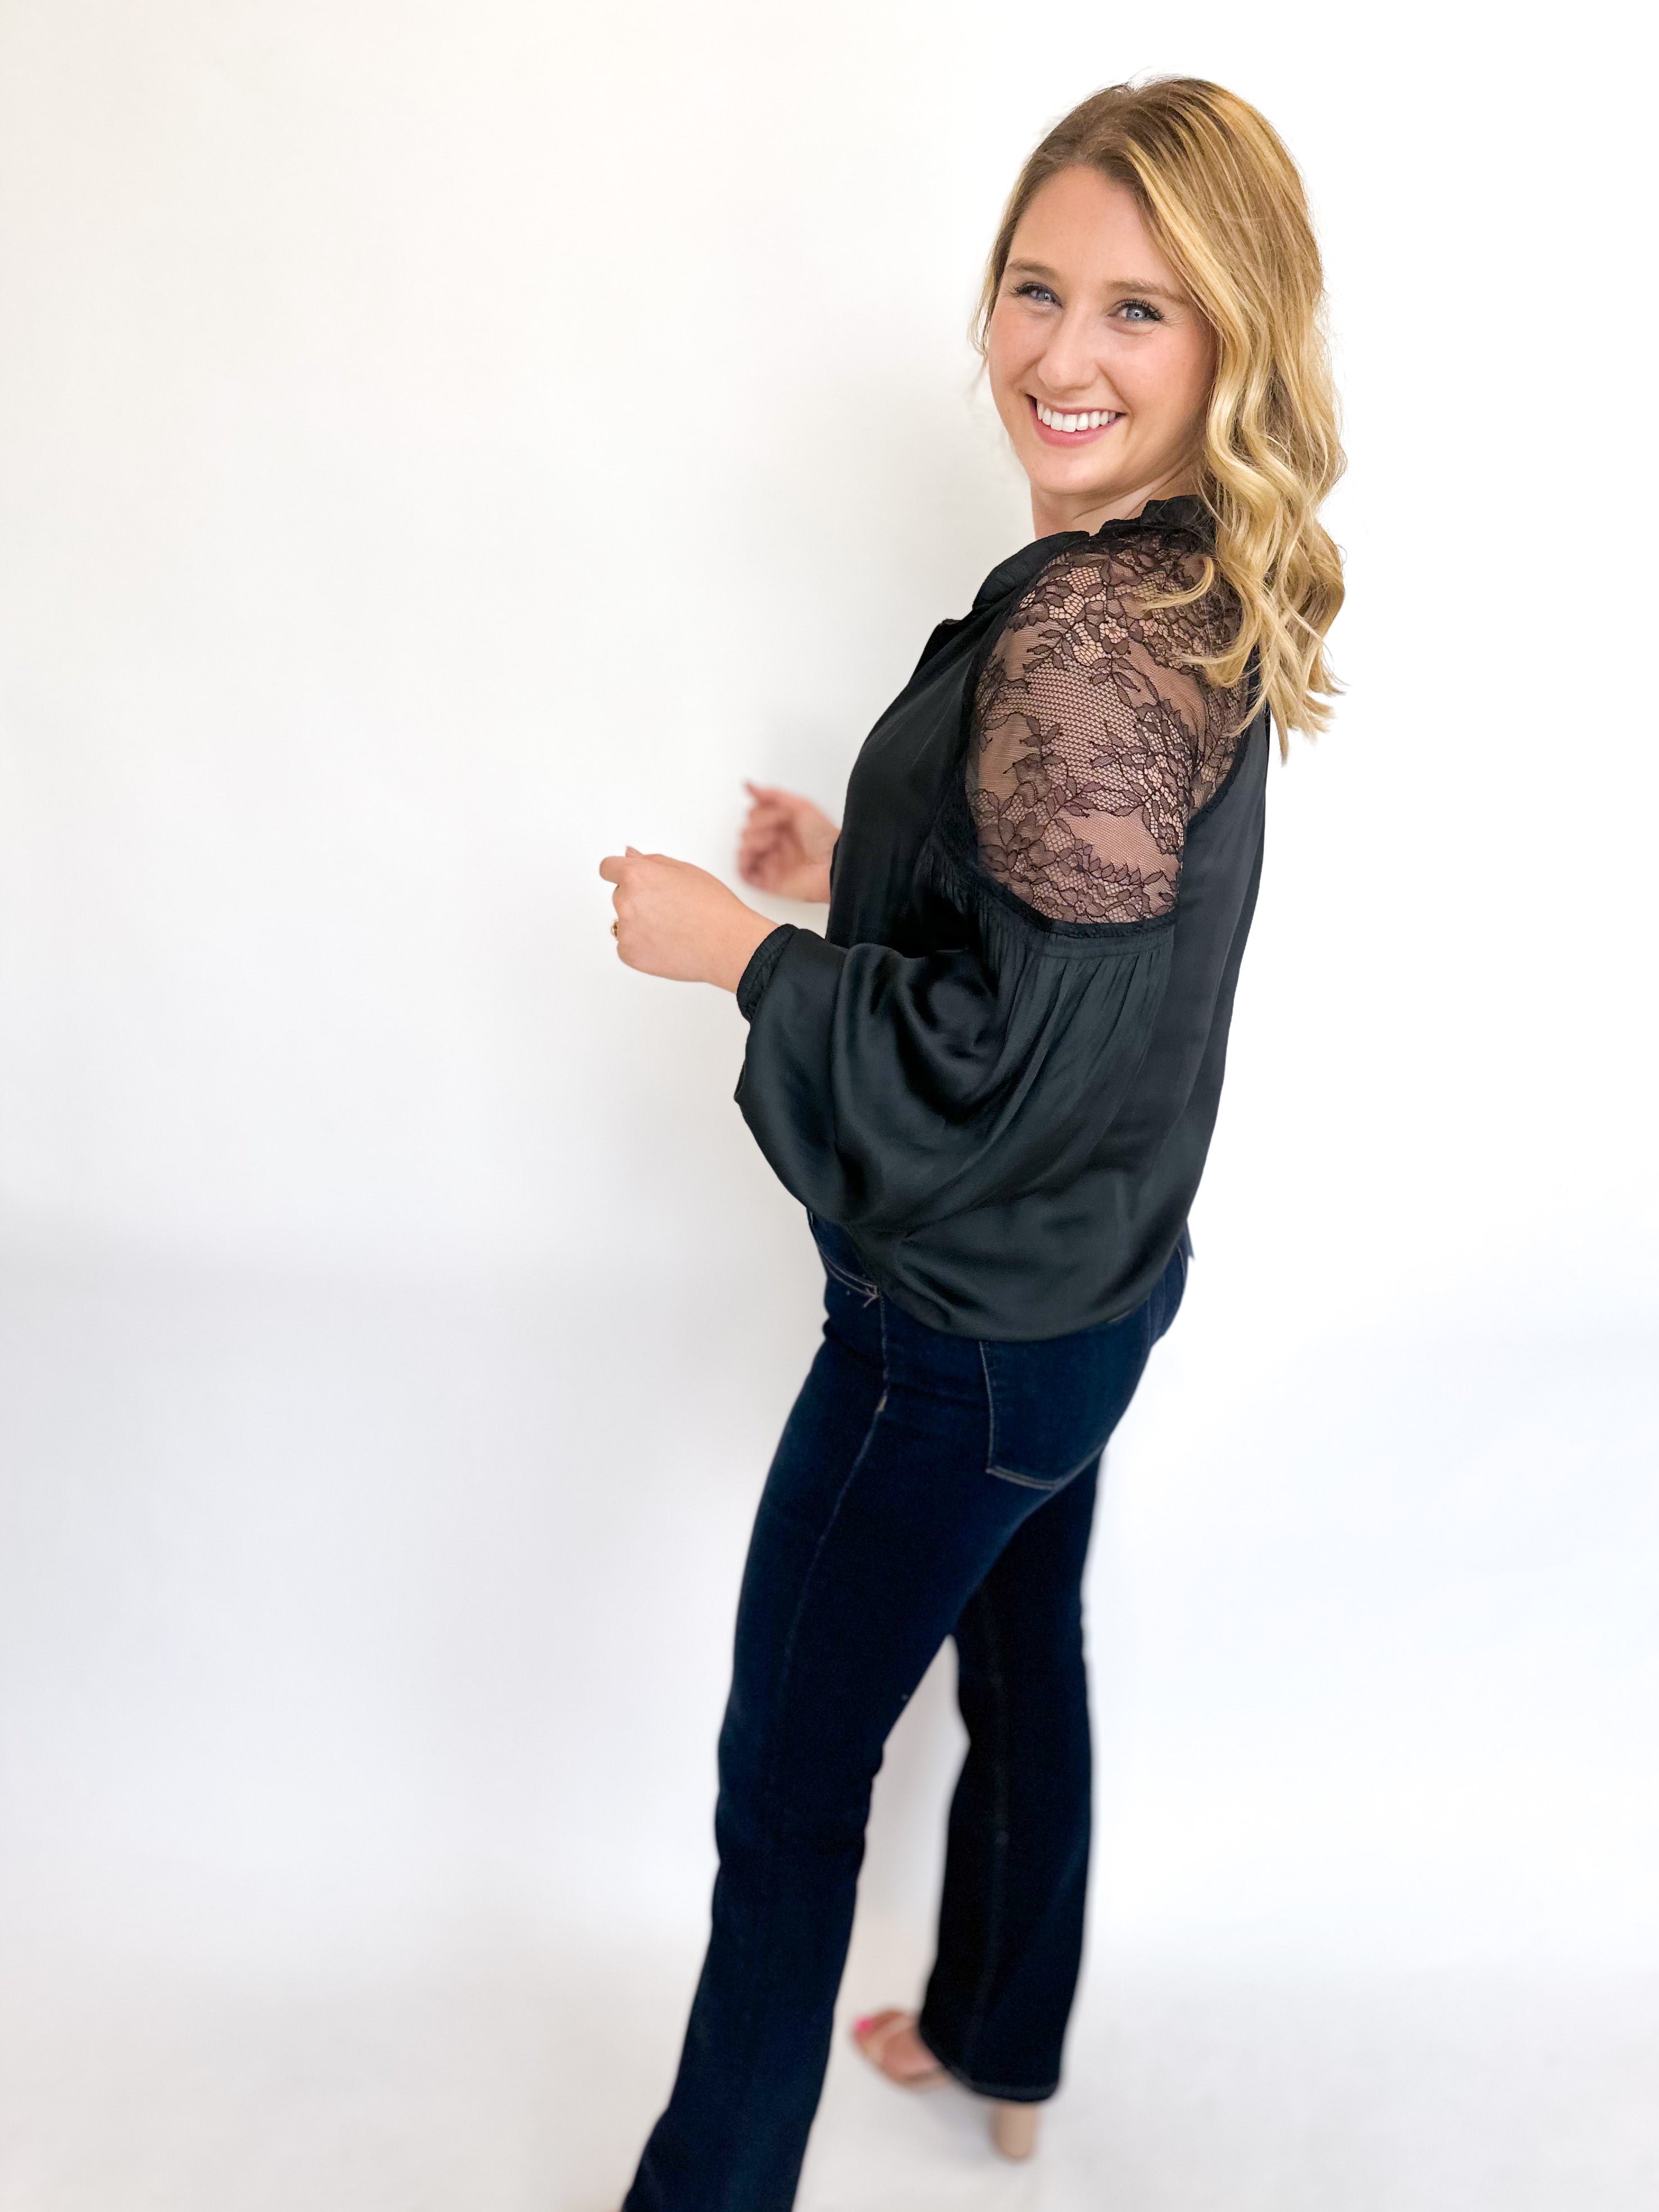 Lace Shoulder Blouse- Black-200 Fashion Blouses-CURRENT AIR CLOTHING-July & June Women's Fashion Boutique Located in San Antonio, Texas